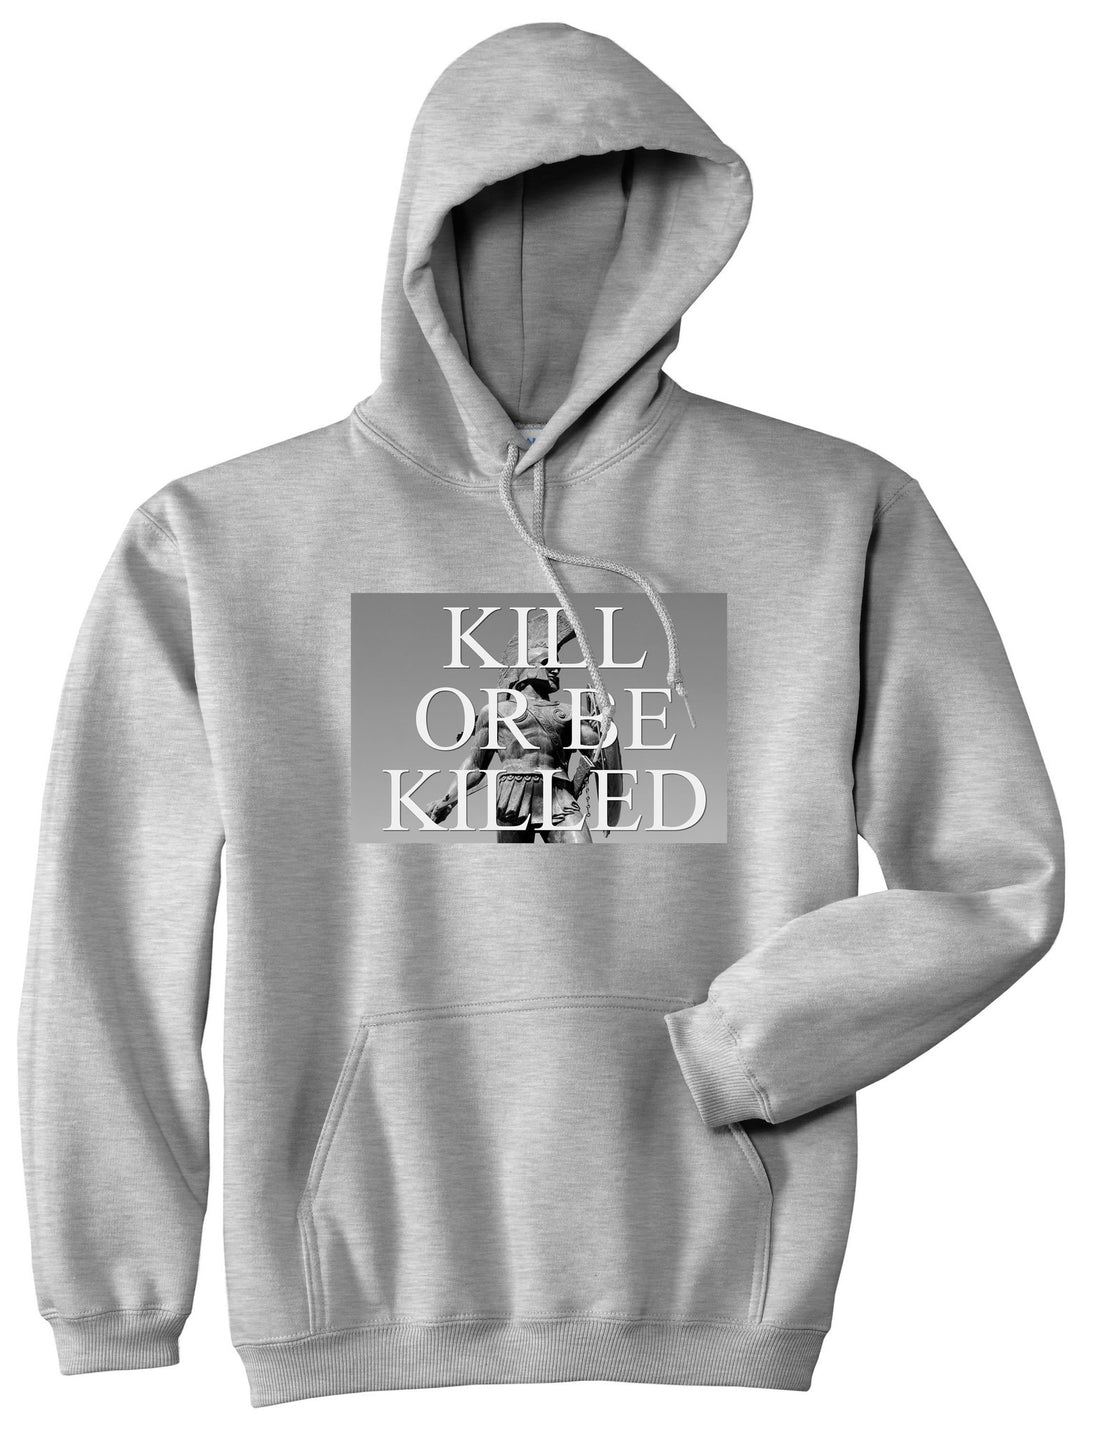 Kill Or Be Killed Pullover Hoodie Hoody in Grey by Kings Of NY